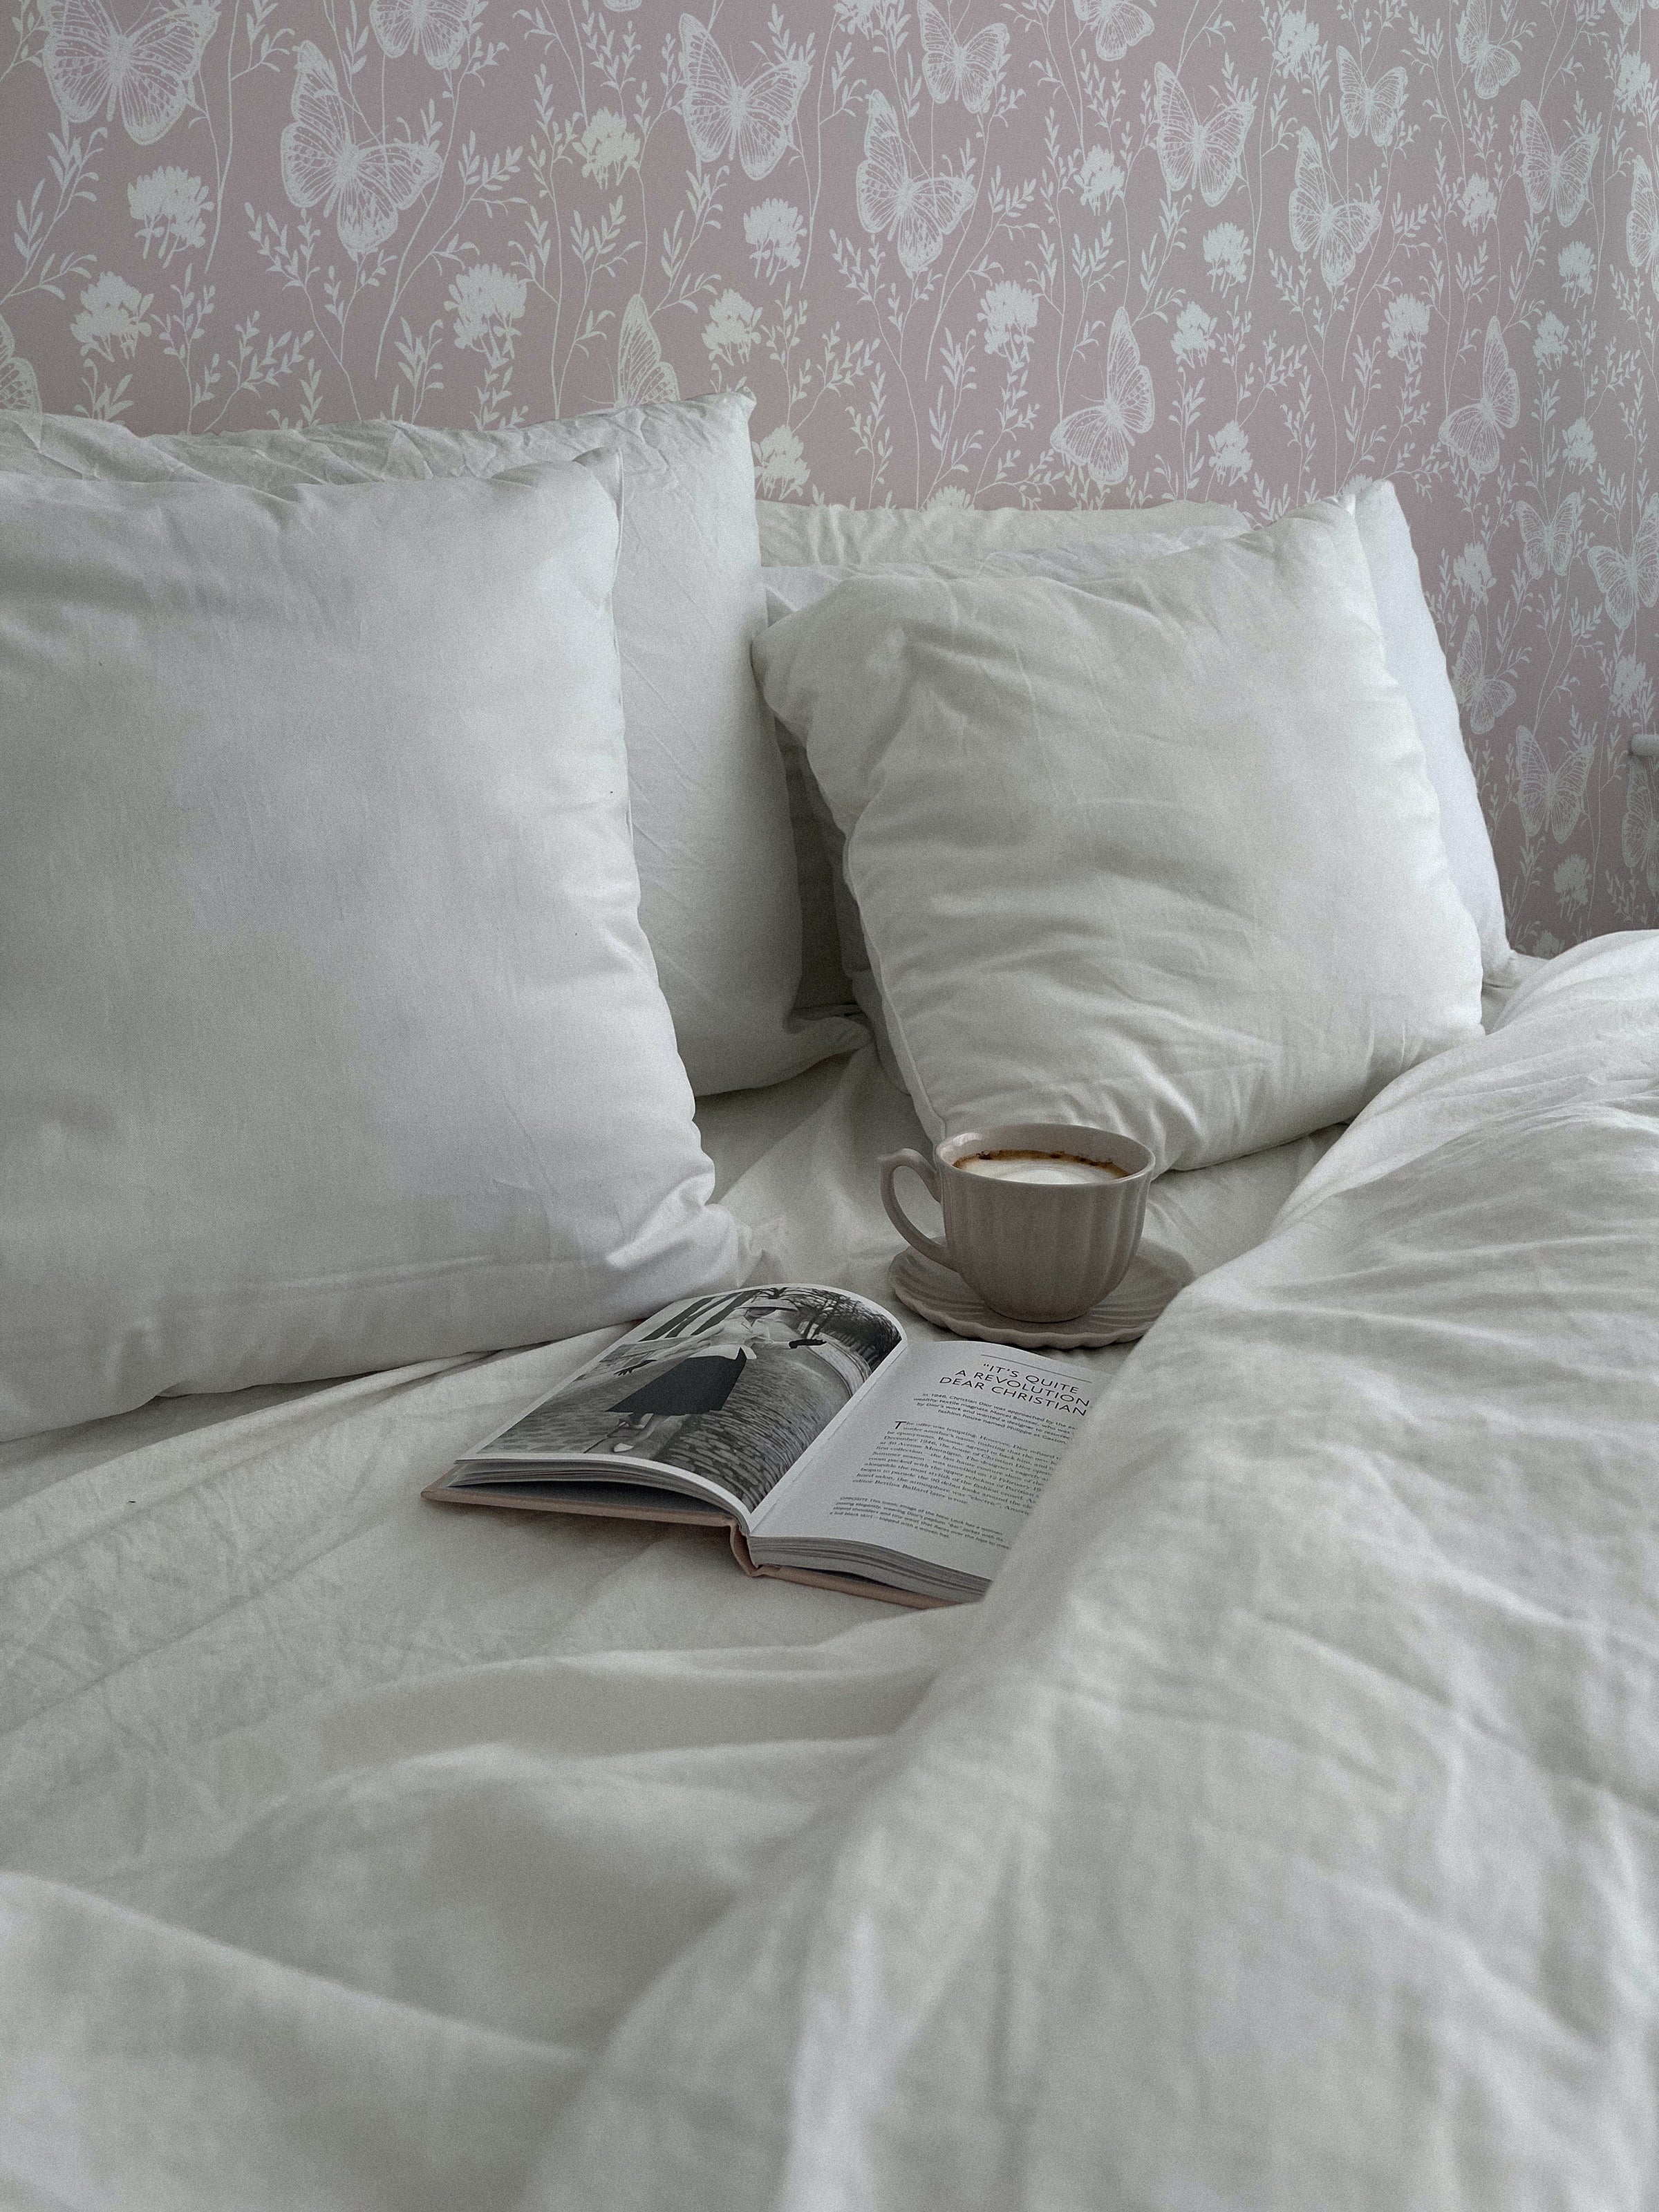 a cozy bedroom setting where the "Whimsical Wings Wallpaper" provides a whimsical background. The camera captures a part of the bed with plush pillows, a book, and a cup of coffee, inviting a relaxed and homey feel complemented by the soft wallpaper design.